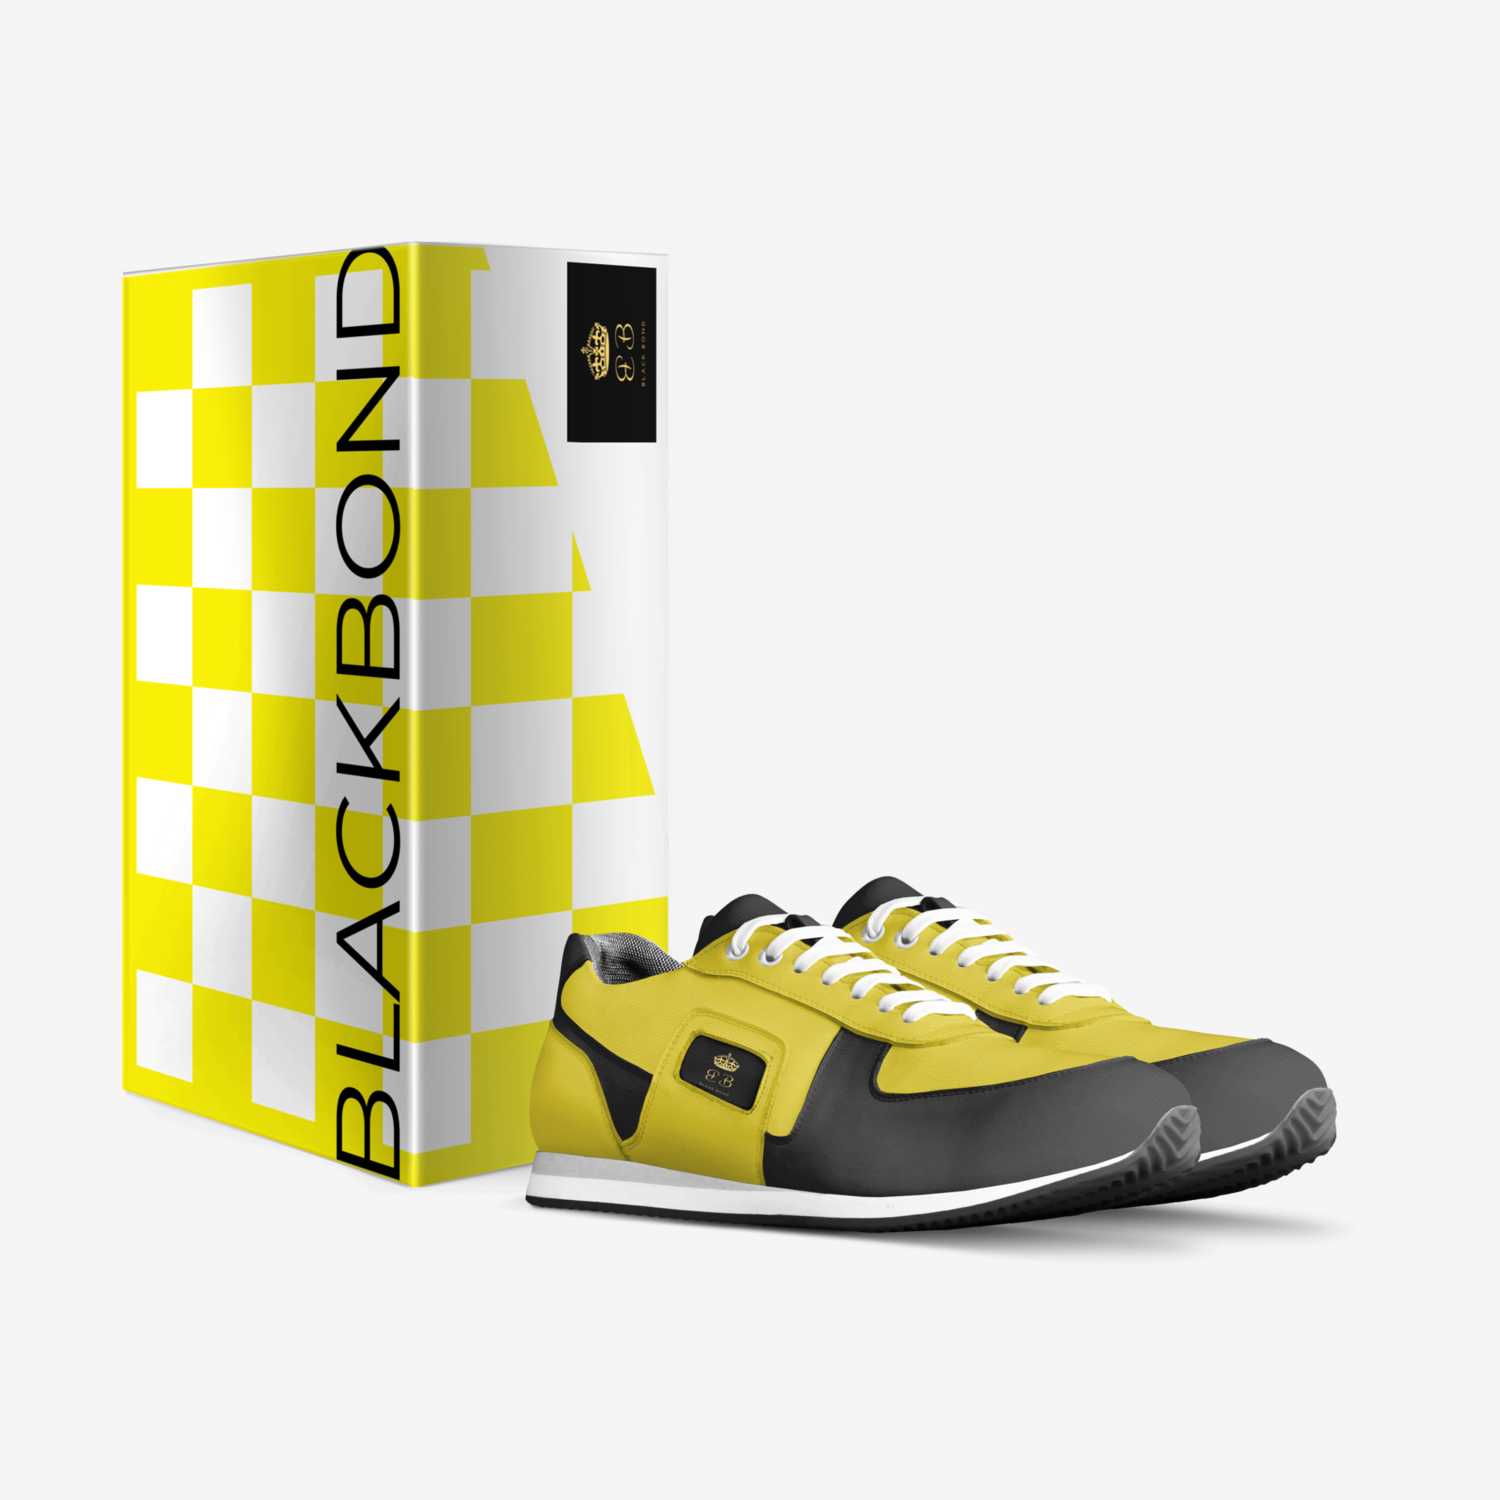 BLACKBOND YELLOW custom made in Italy shoes by Black Bond | Box view